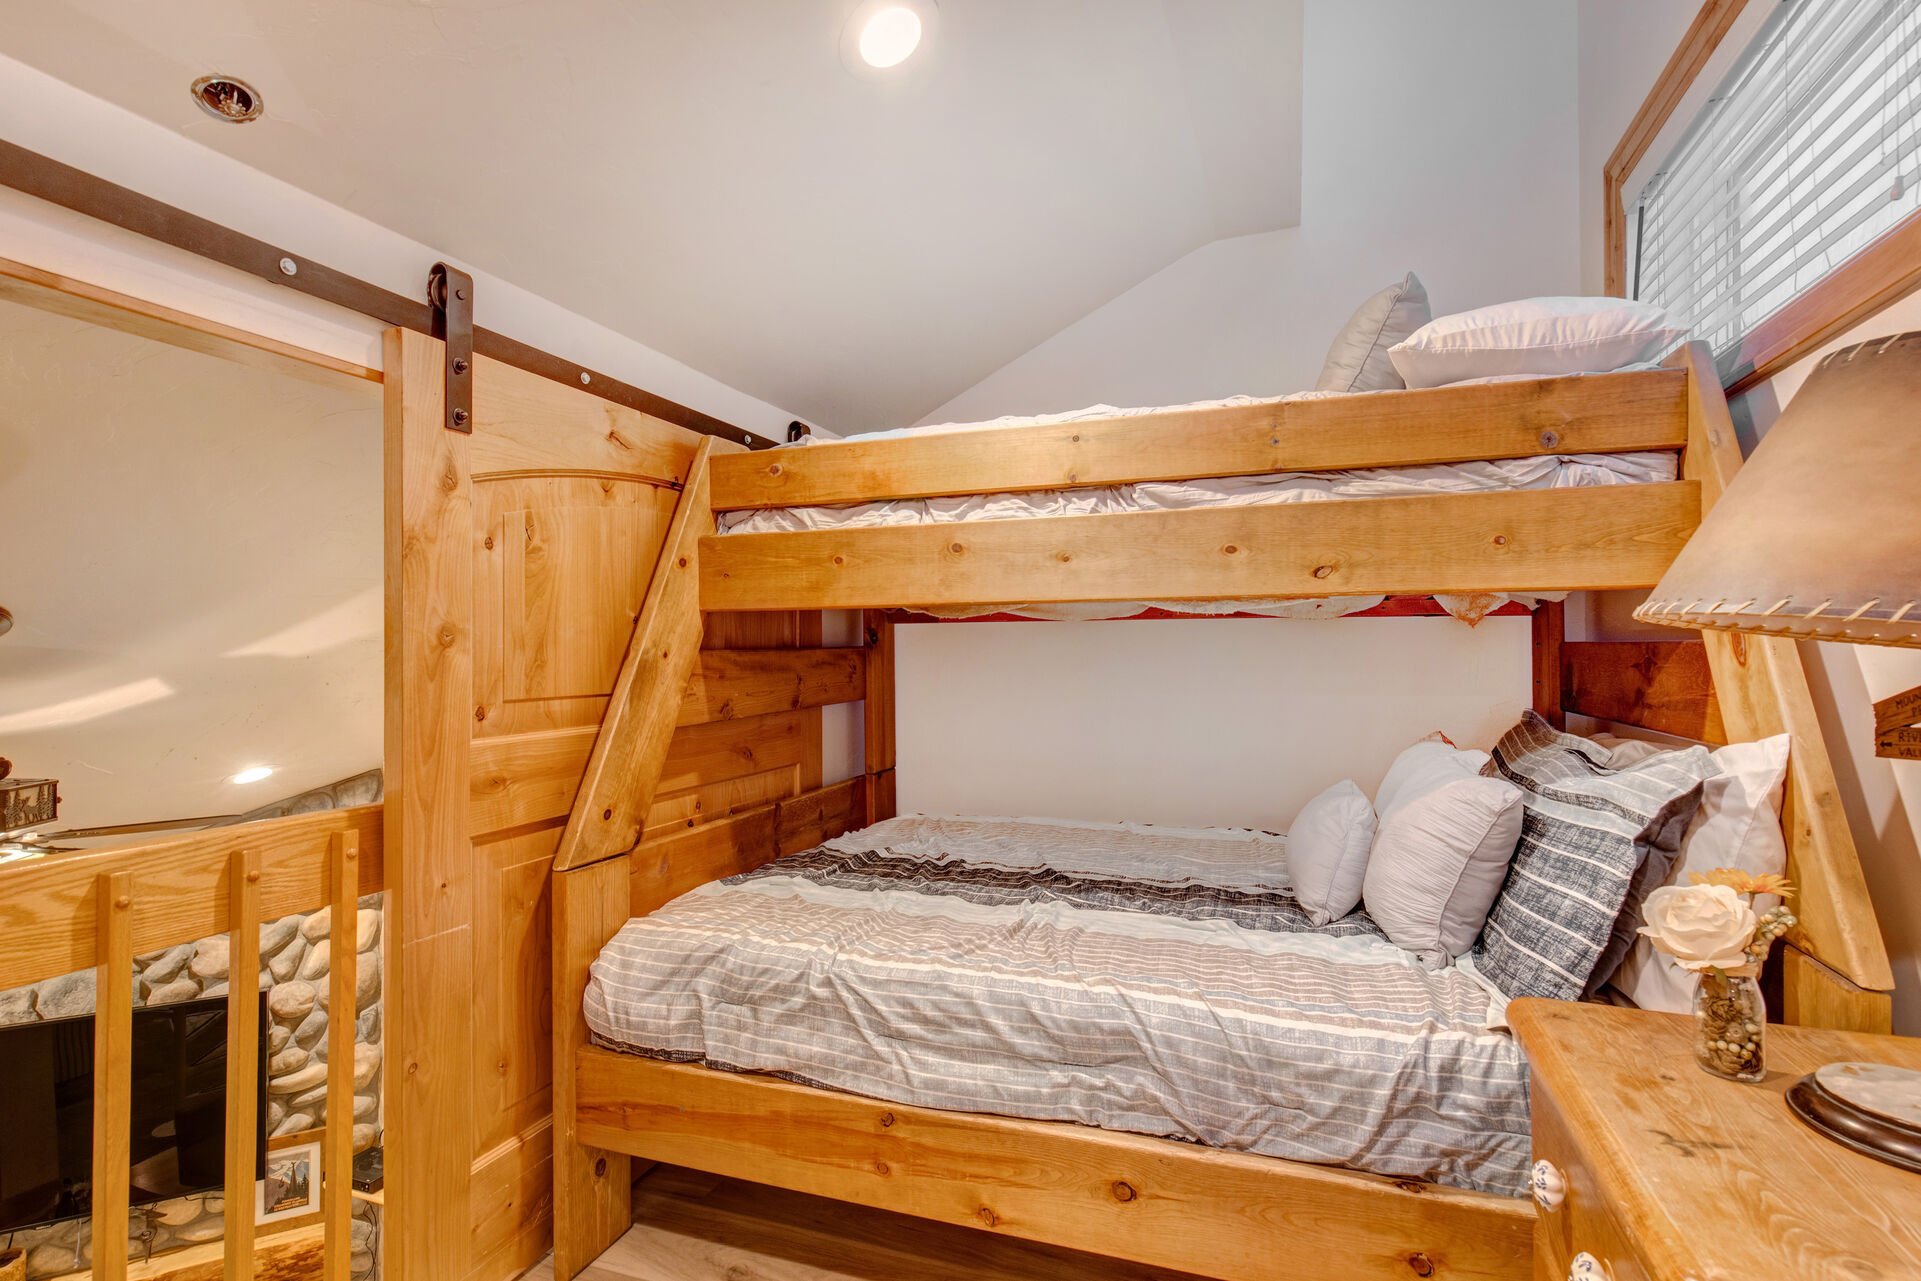 Upper Level Bunk Room with Twin over Full bunk bed, and access to a full shared bath with a tub/shower on the lower level